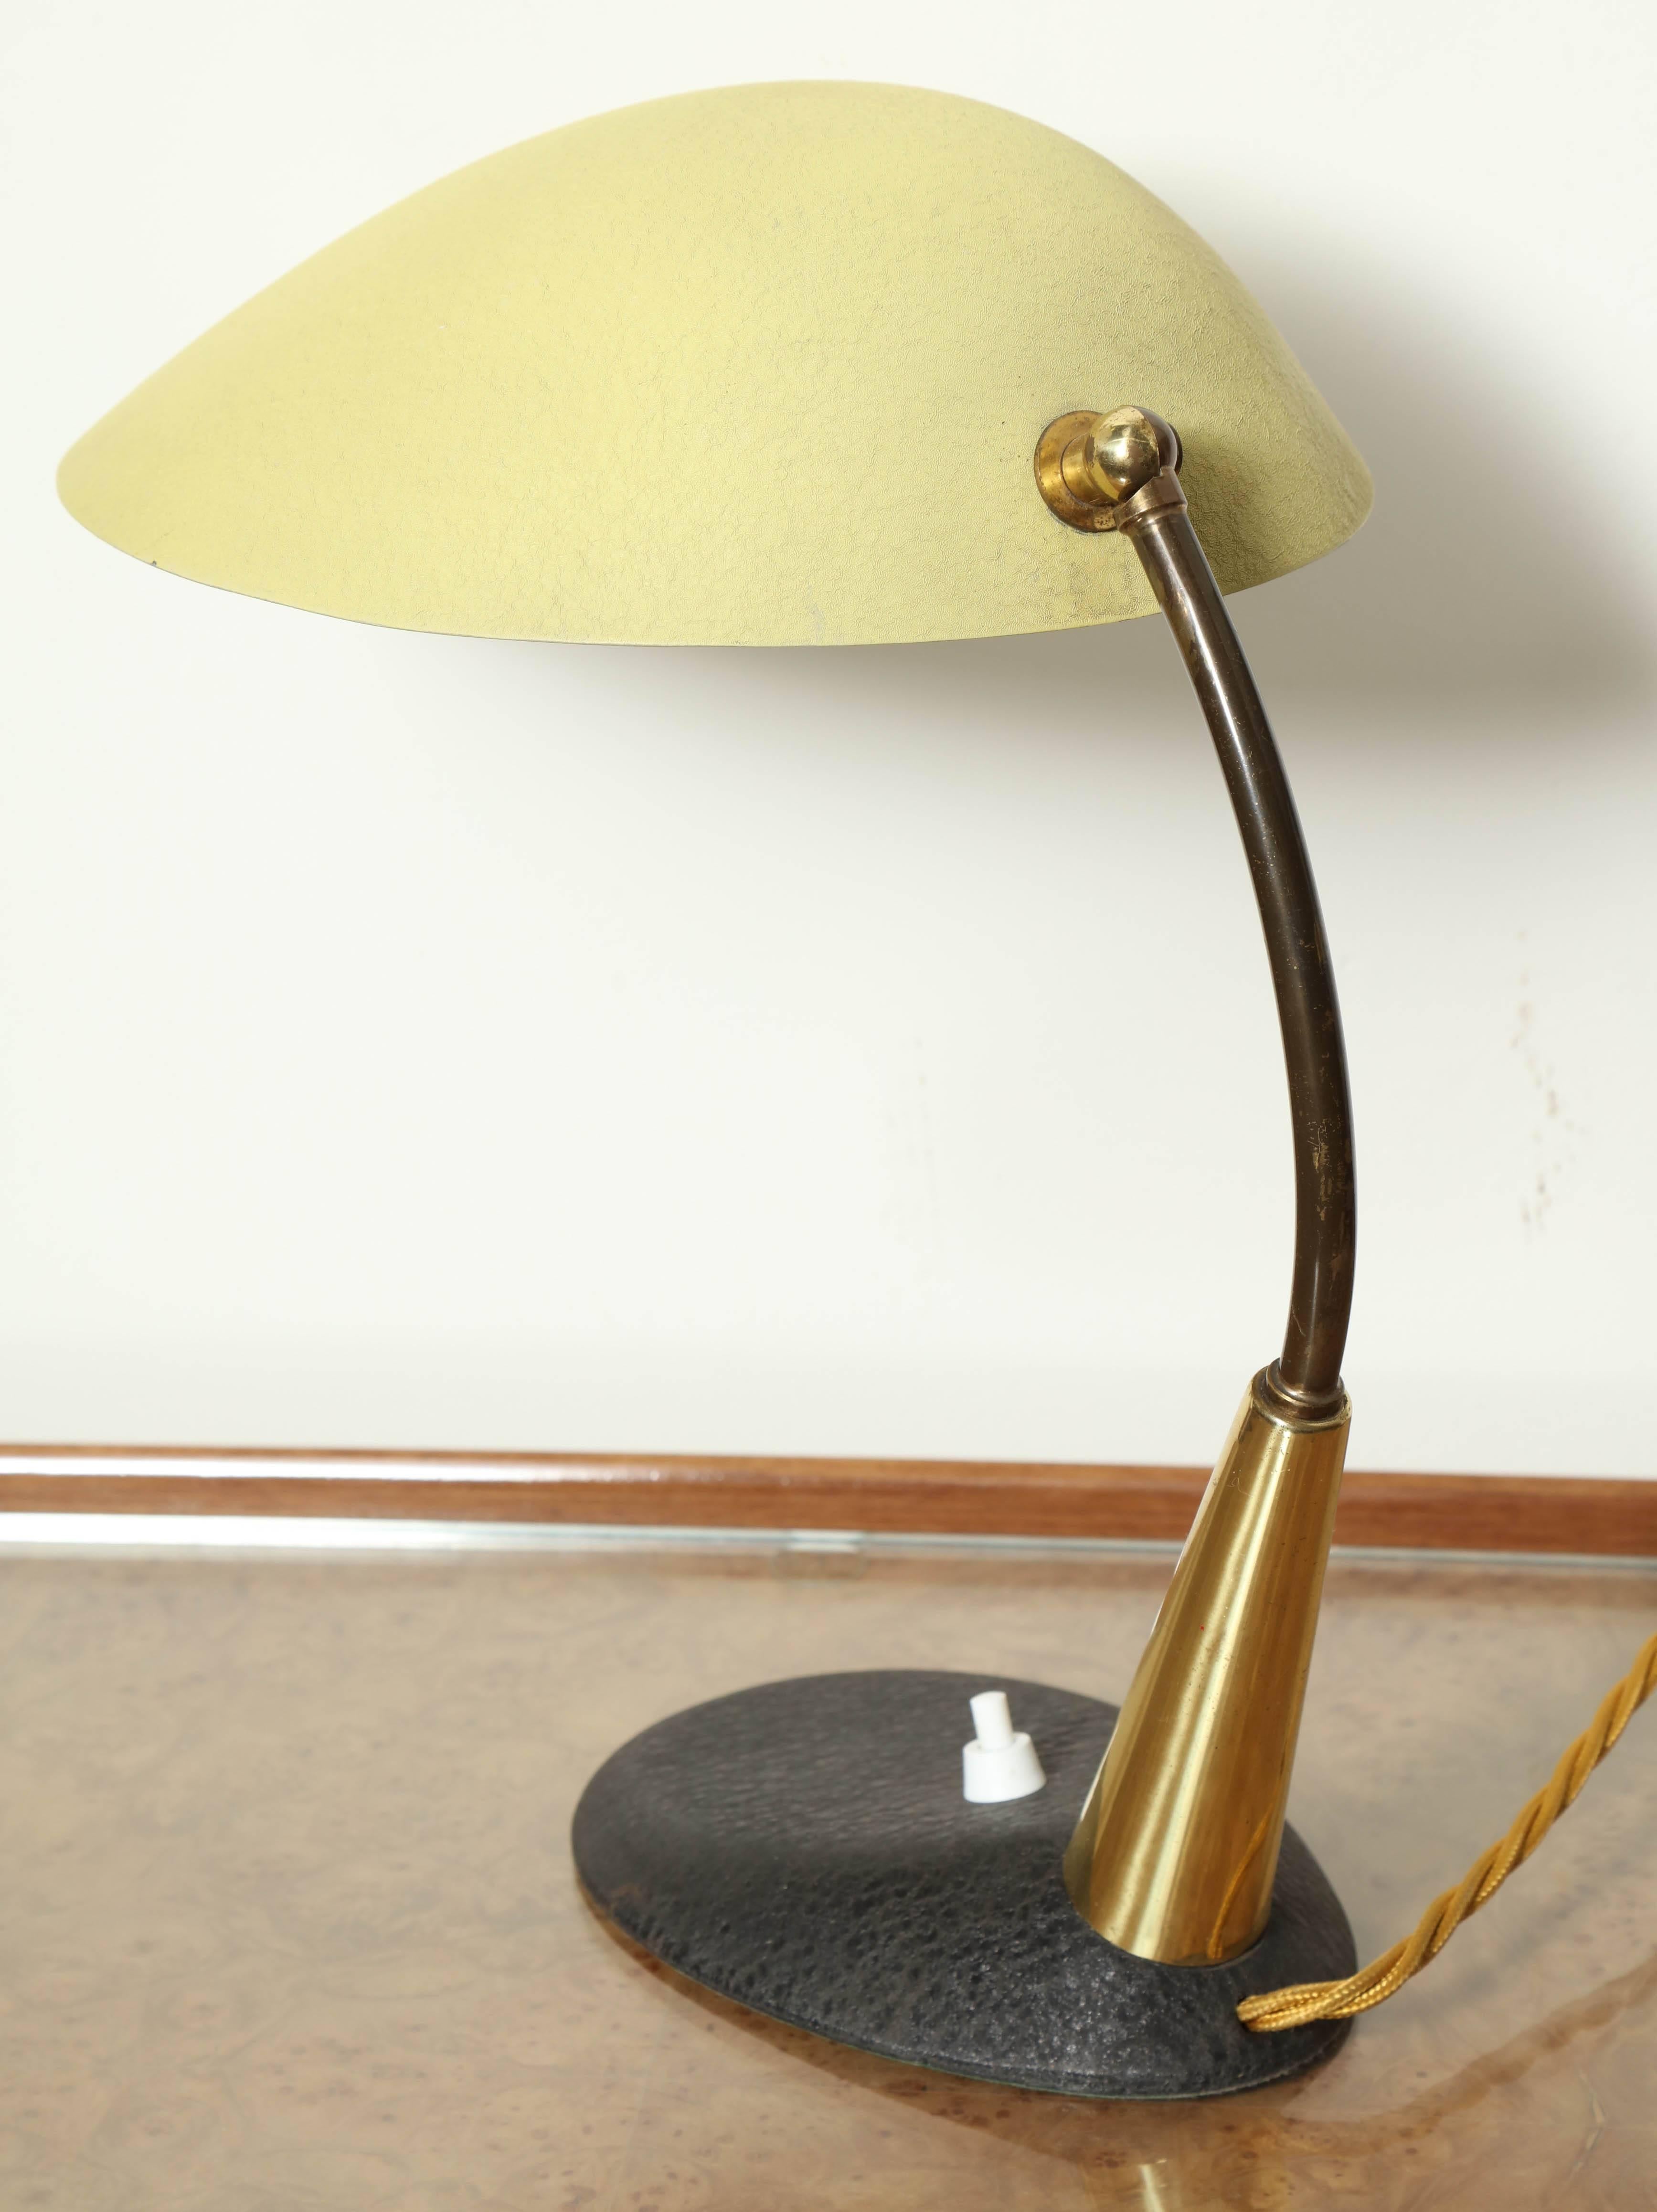 Hand-Crafted Desk Lamp Made in Milan by Stilnovo